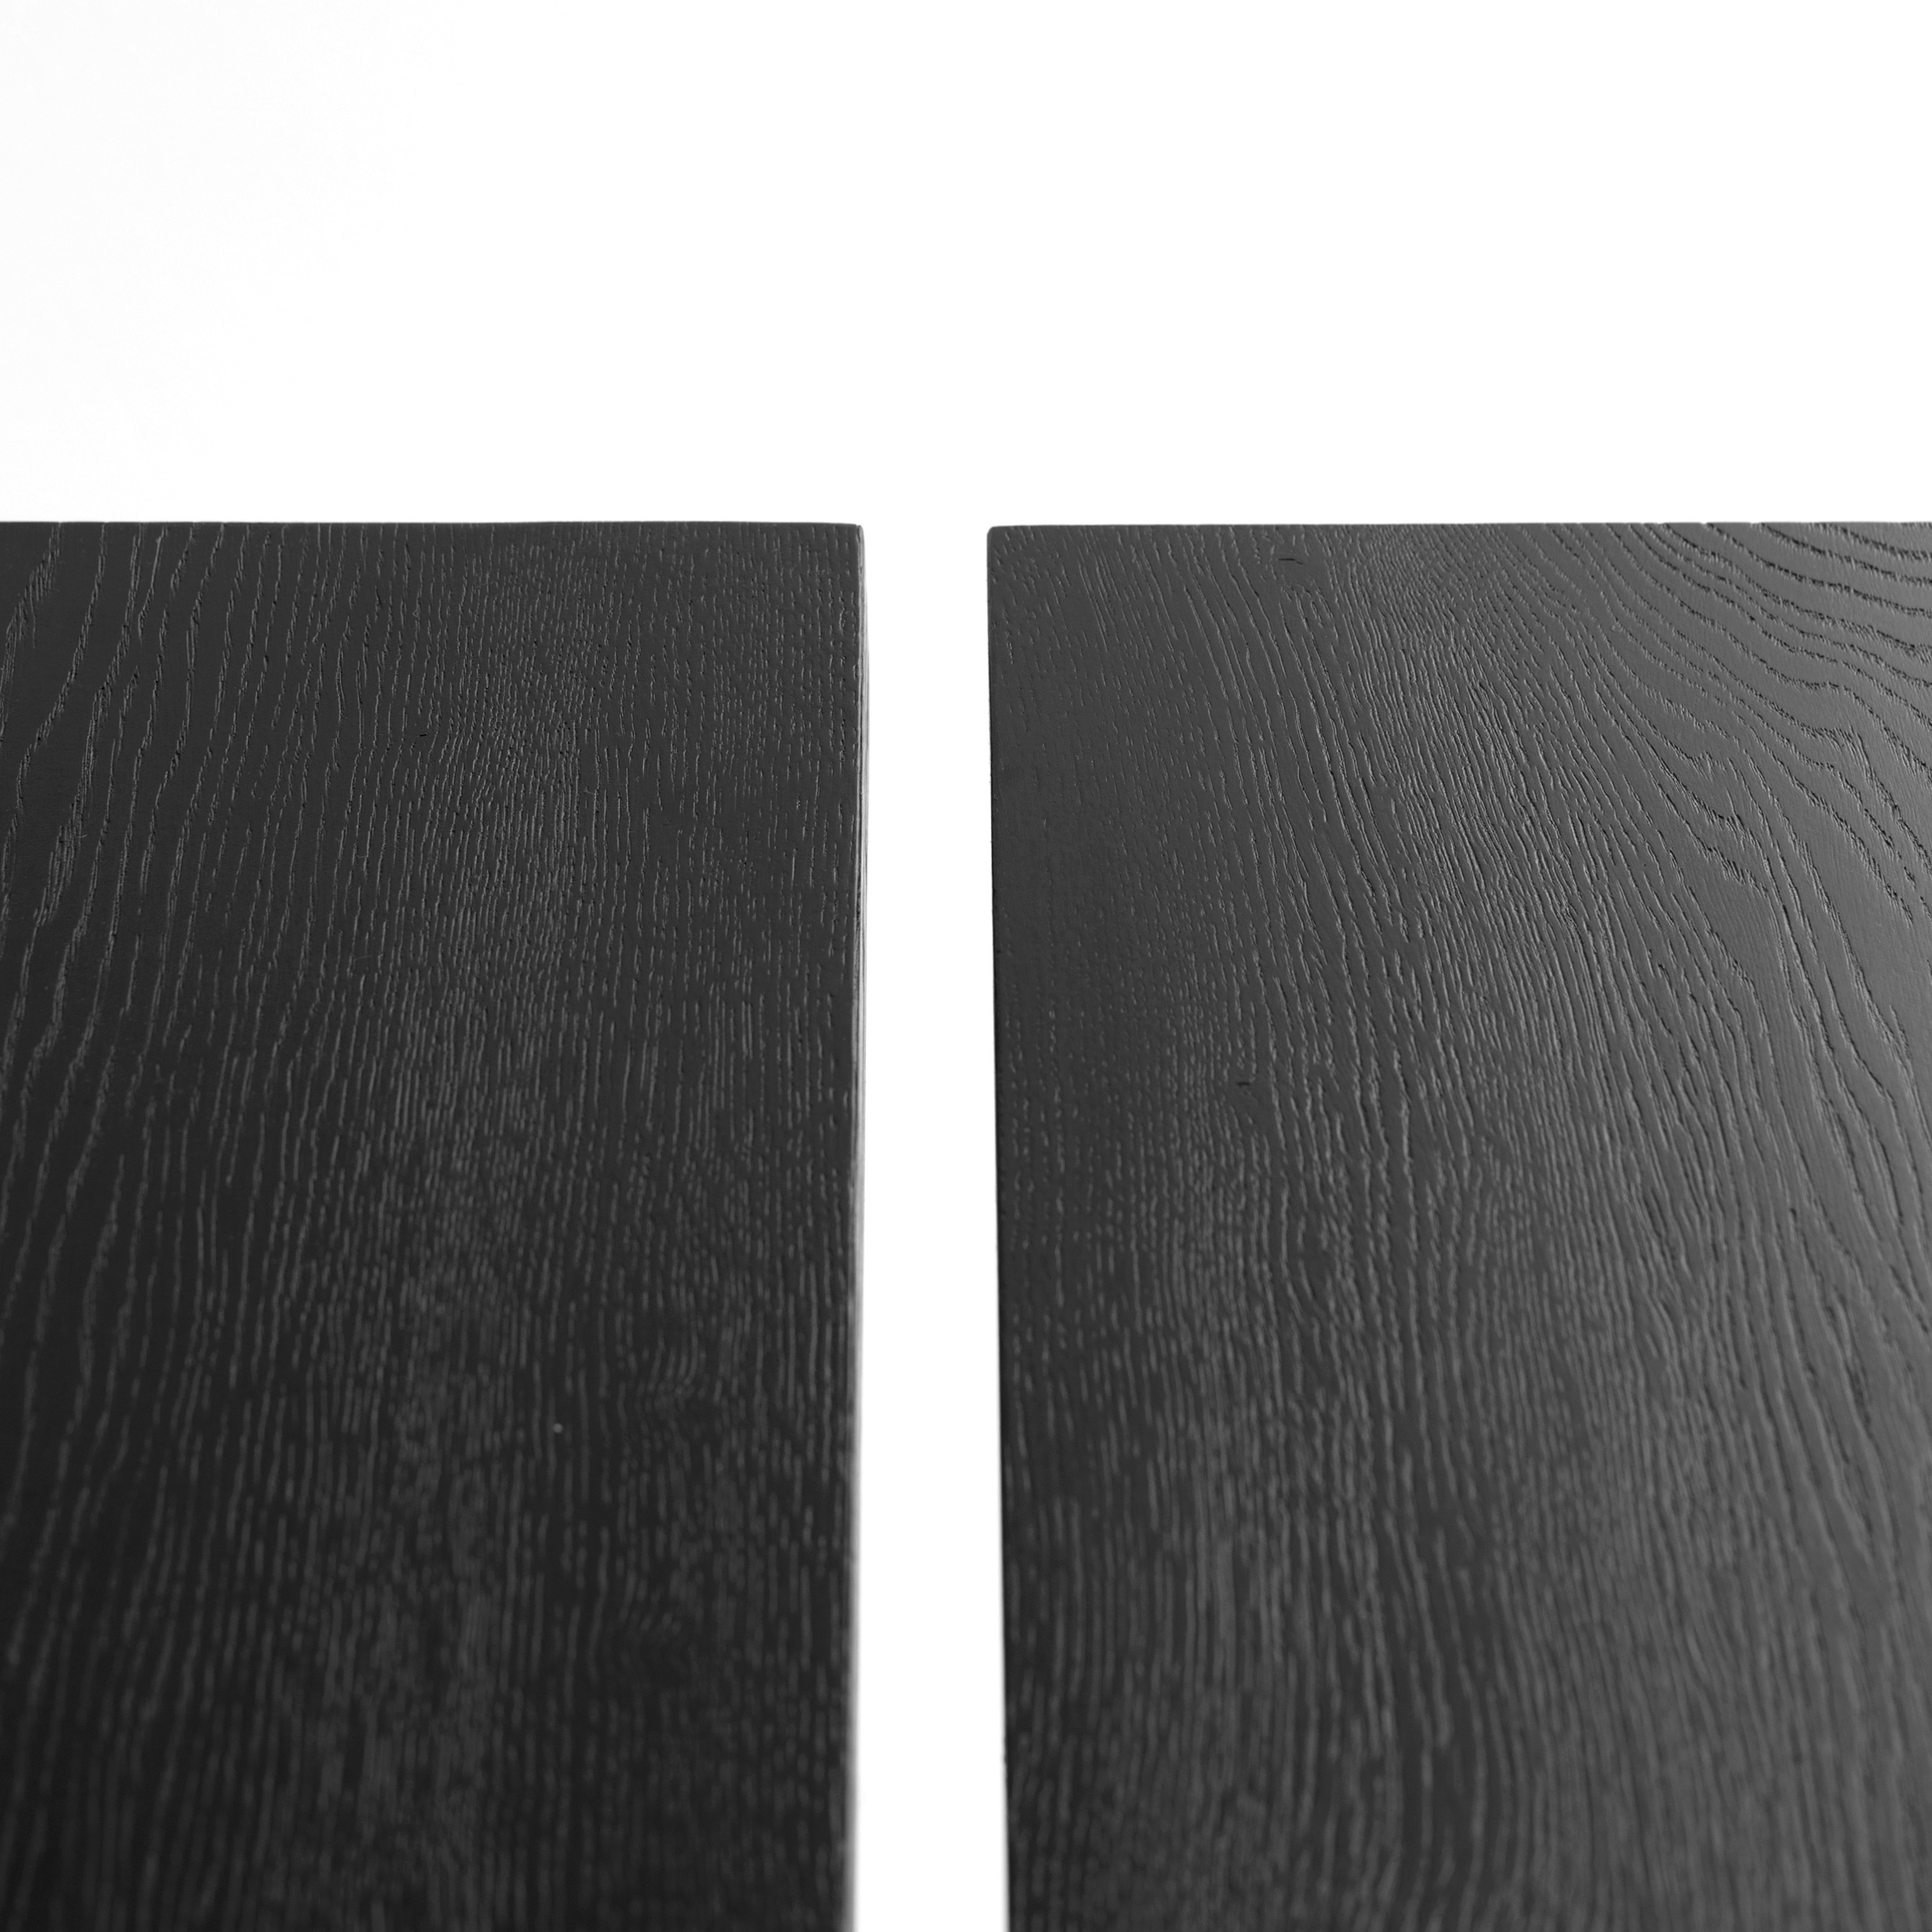 FORM EXCLUSIVE // JOON - IN-/OUTDOOR TABLE | BLACK CHARLED - RAW MONKEY - 220CM X 45CM X 5CM